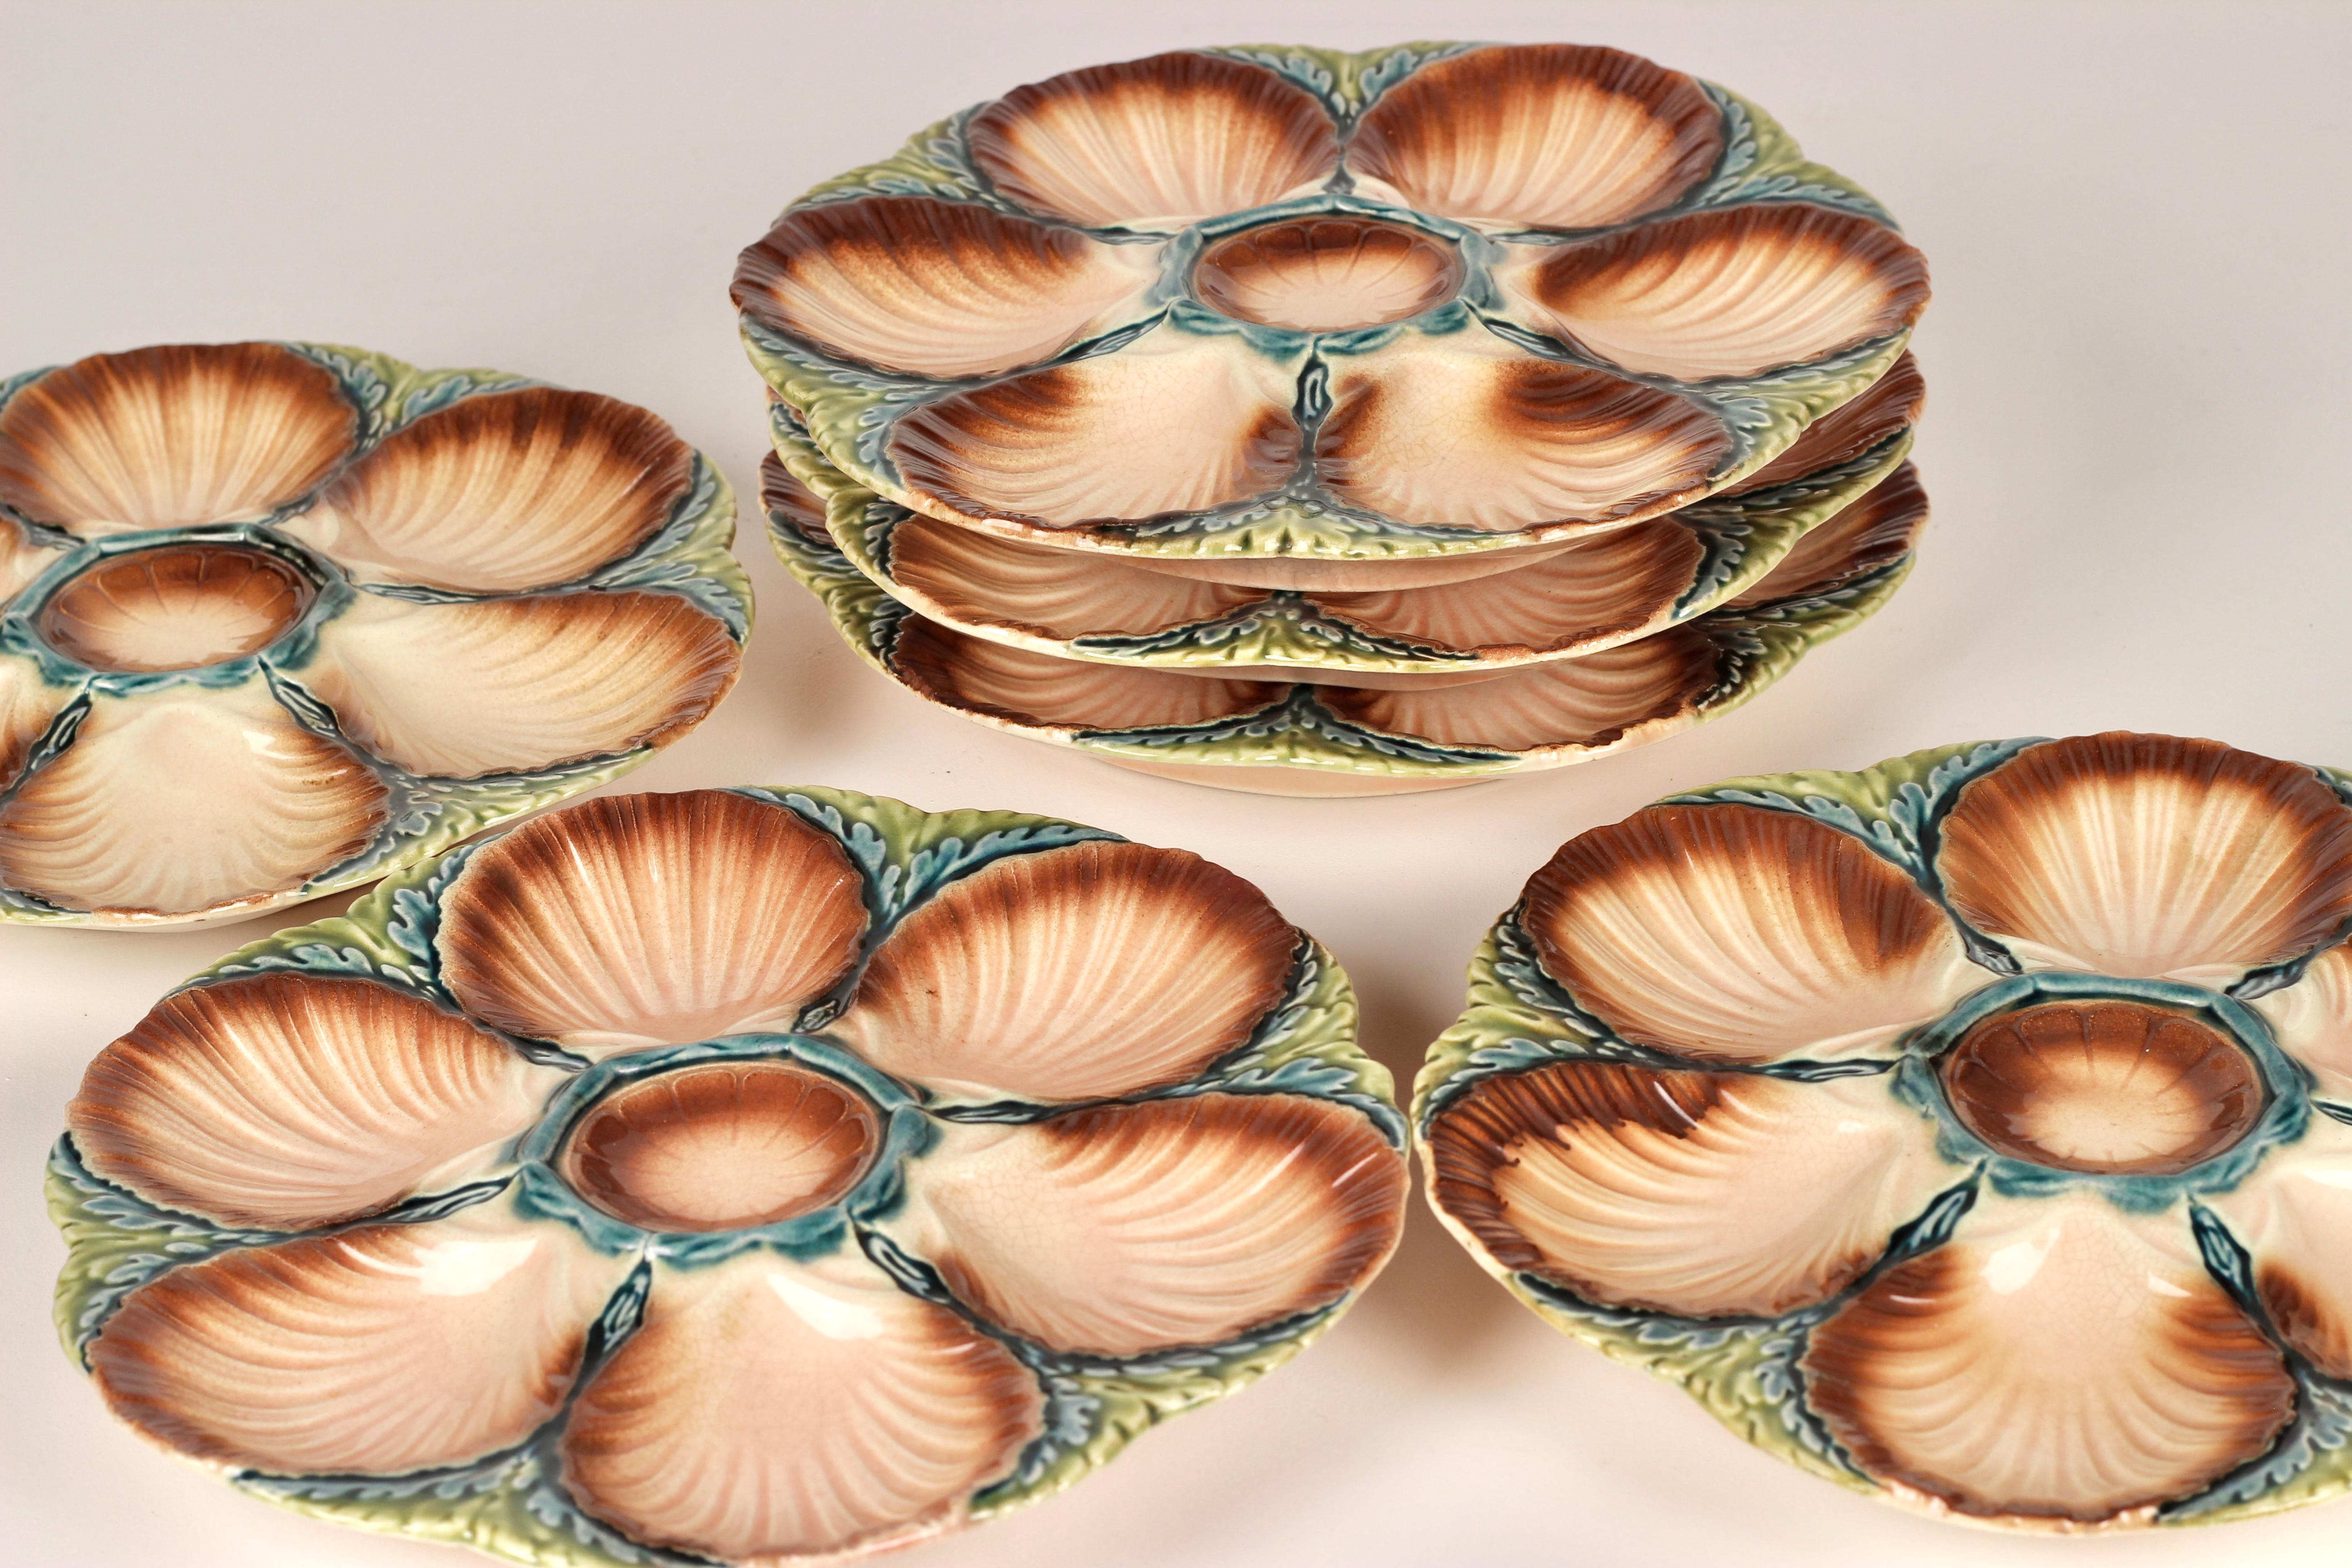 19th Century Sarreguemines Majolica Seaweed and Shell Barbotine Oyster Plate In Good Condition For Sale In London, GB